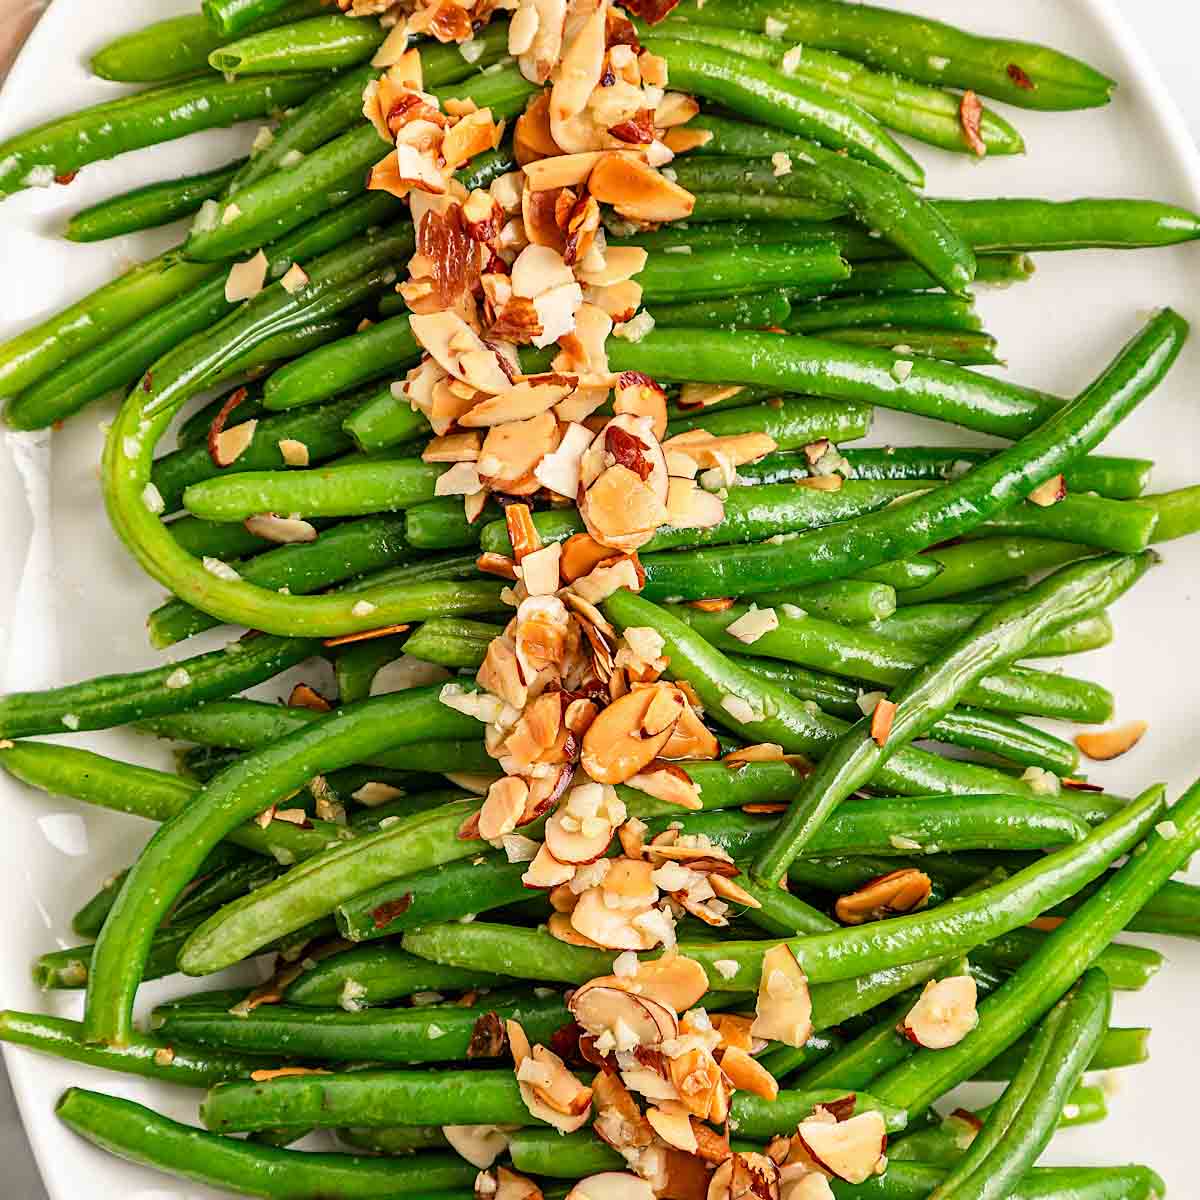 Green beans with almonds (Green beans almondine)